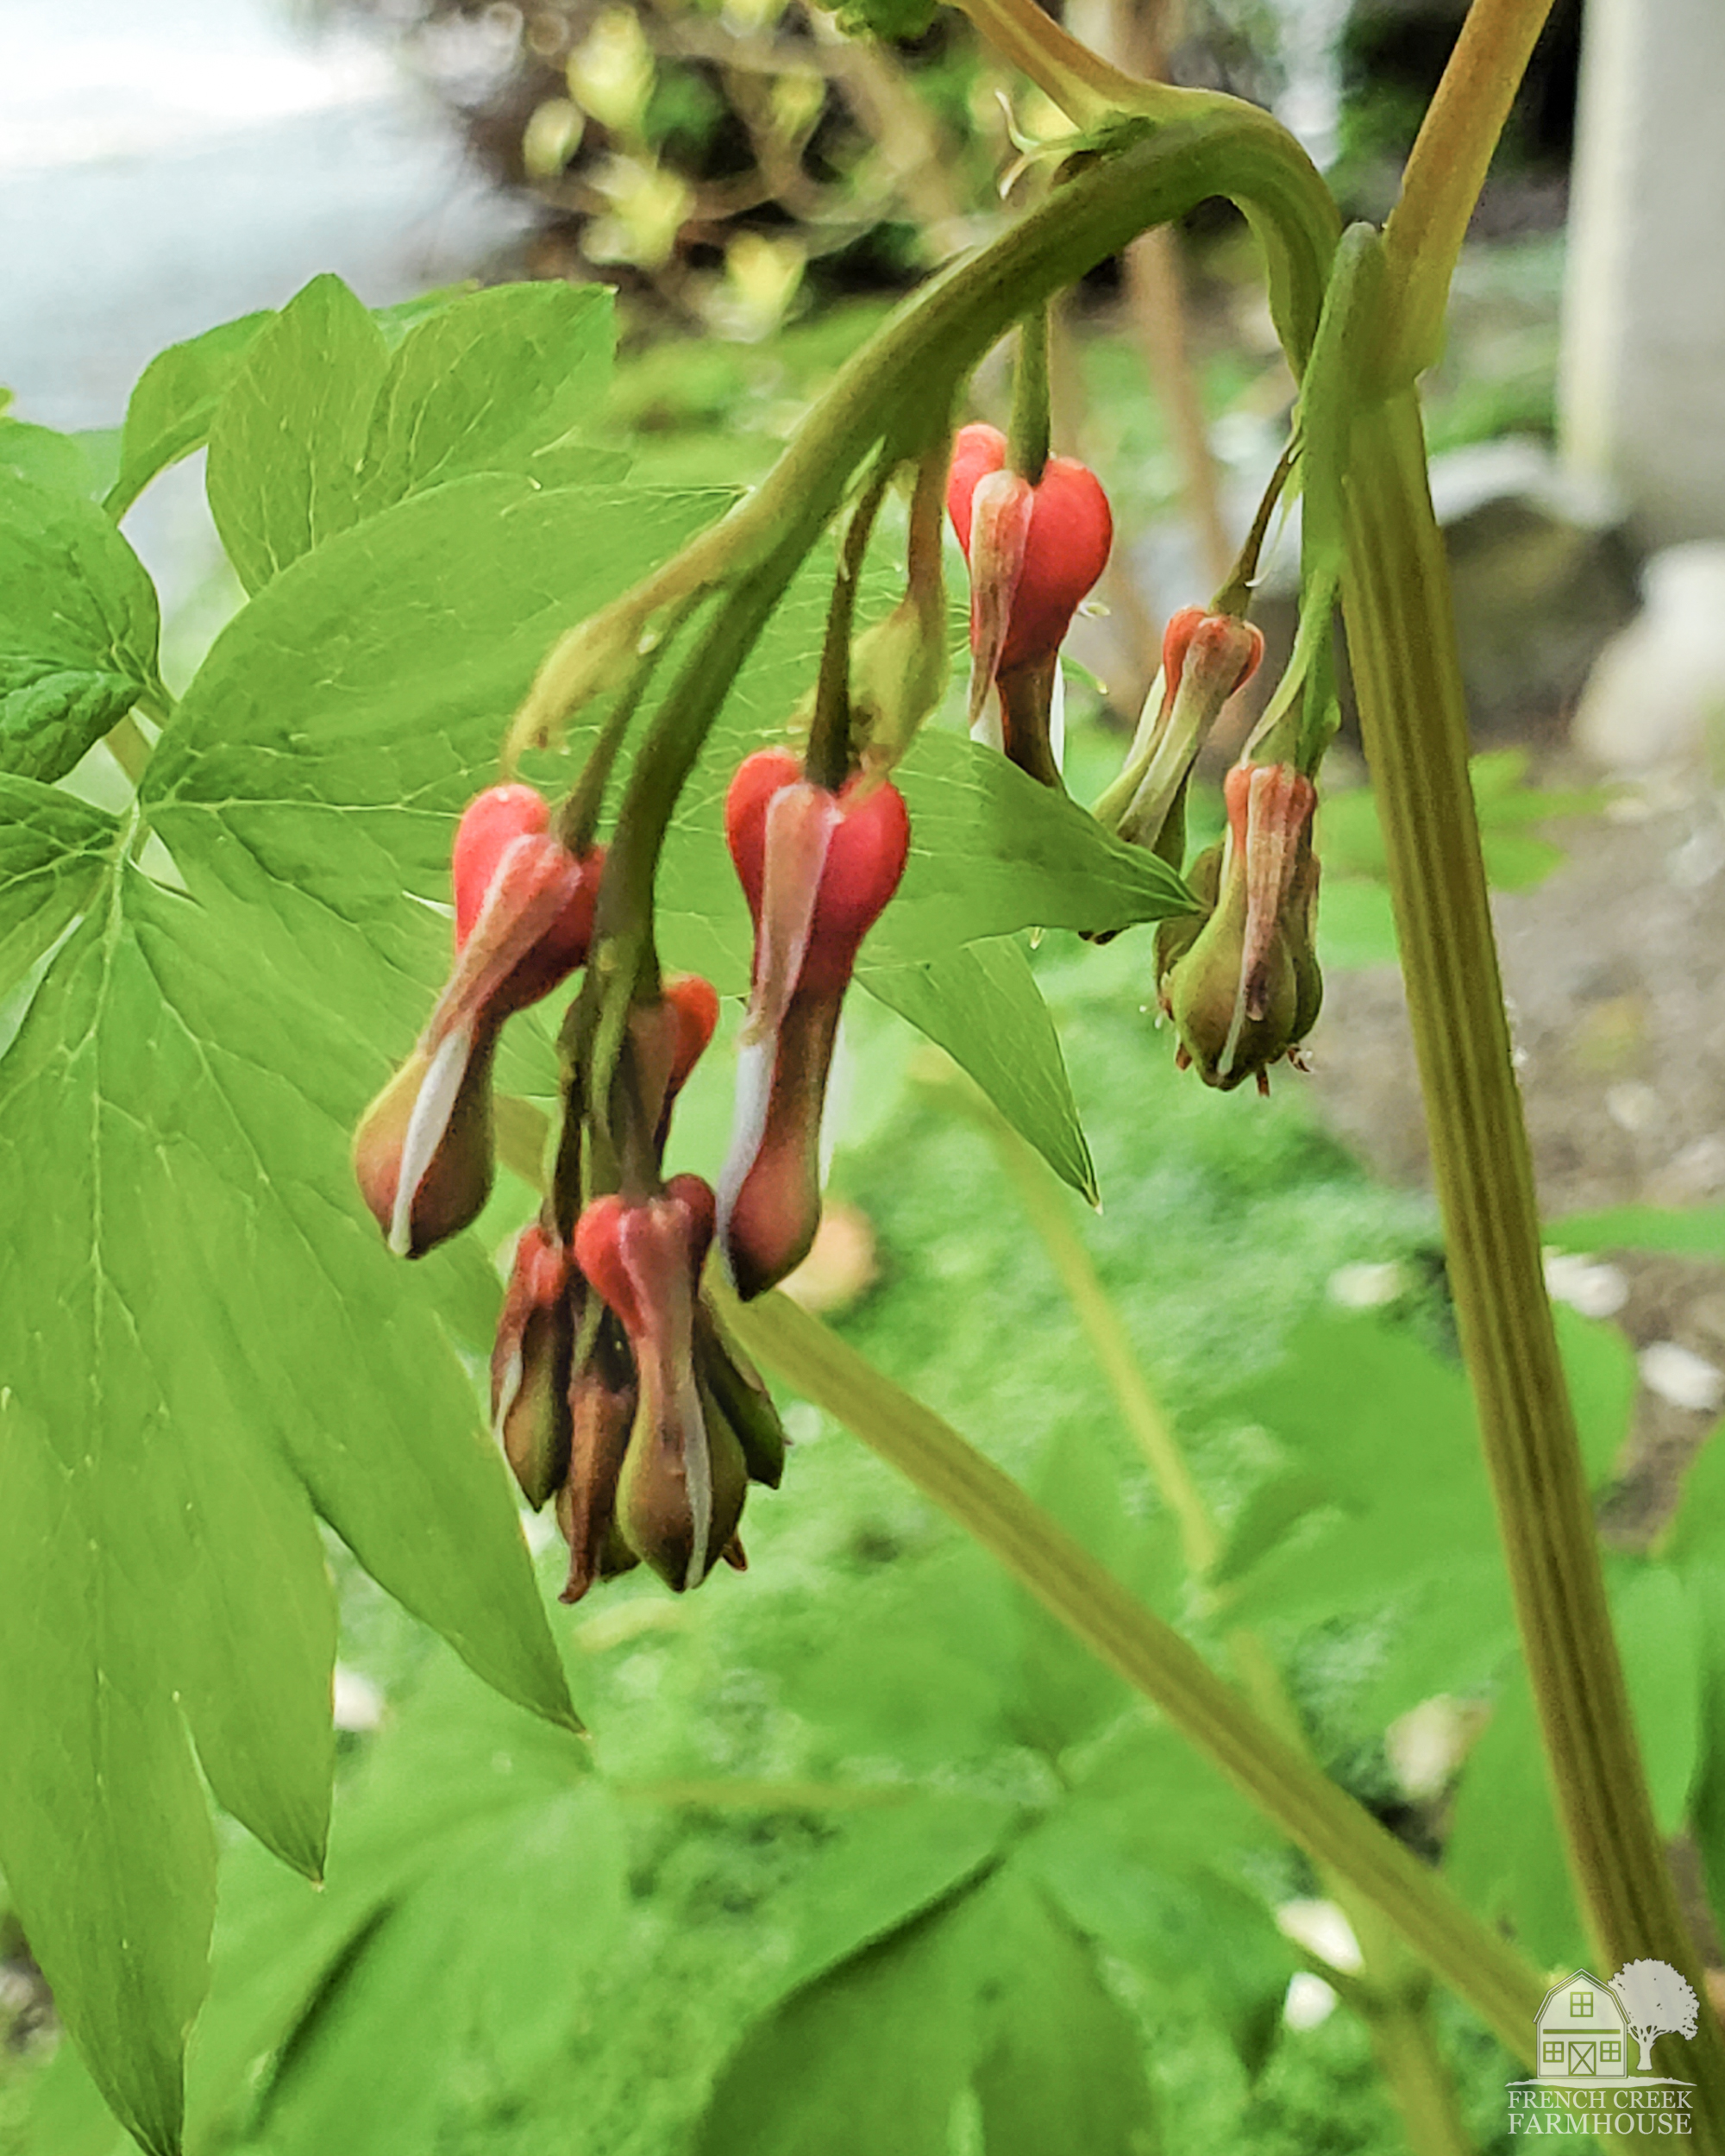 Buds on the Bleeding Heart plant this month